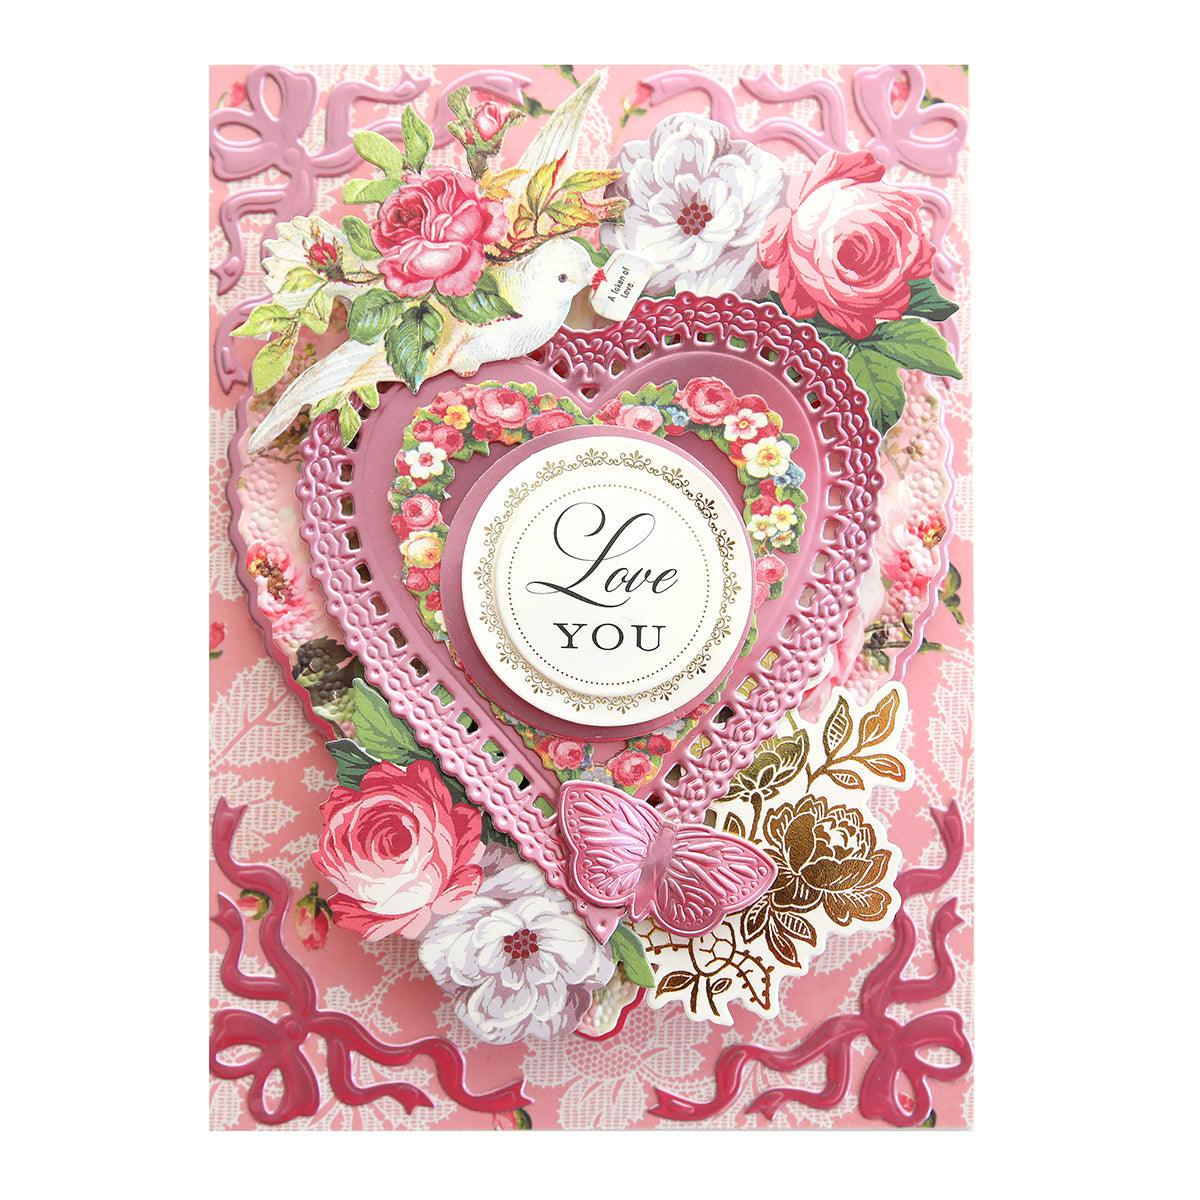 A valentine's day card adorned with Romantic Stickers and Sentiments and featuring a heart surrounded by beautiful roses.